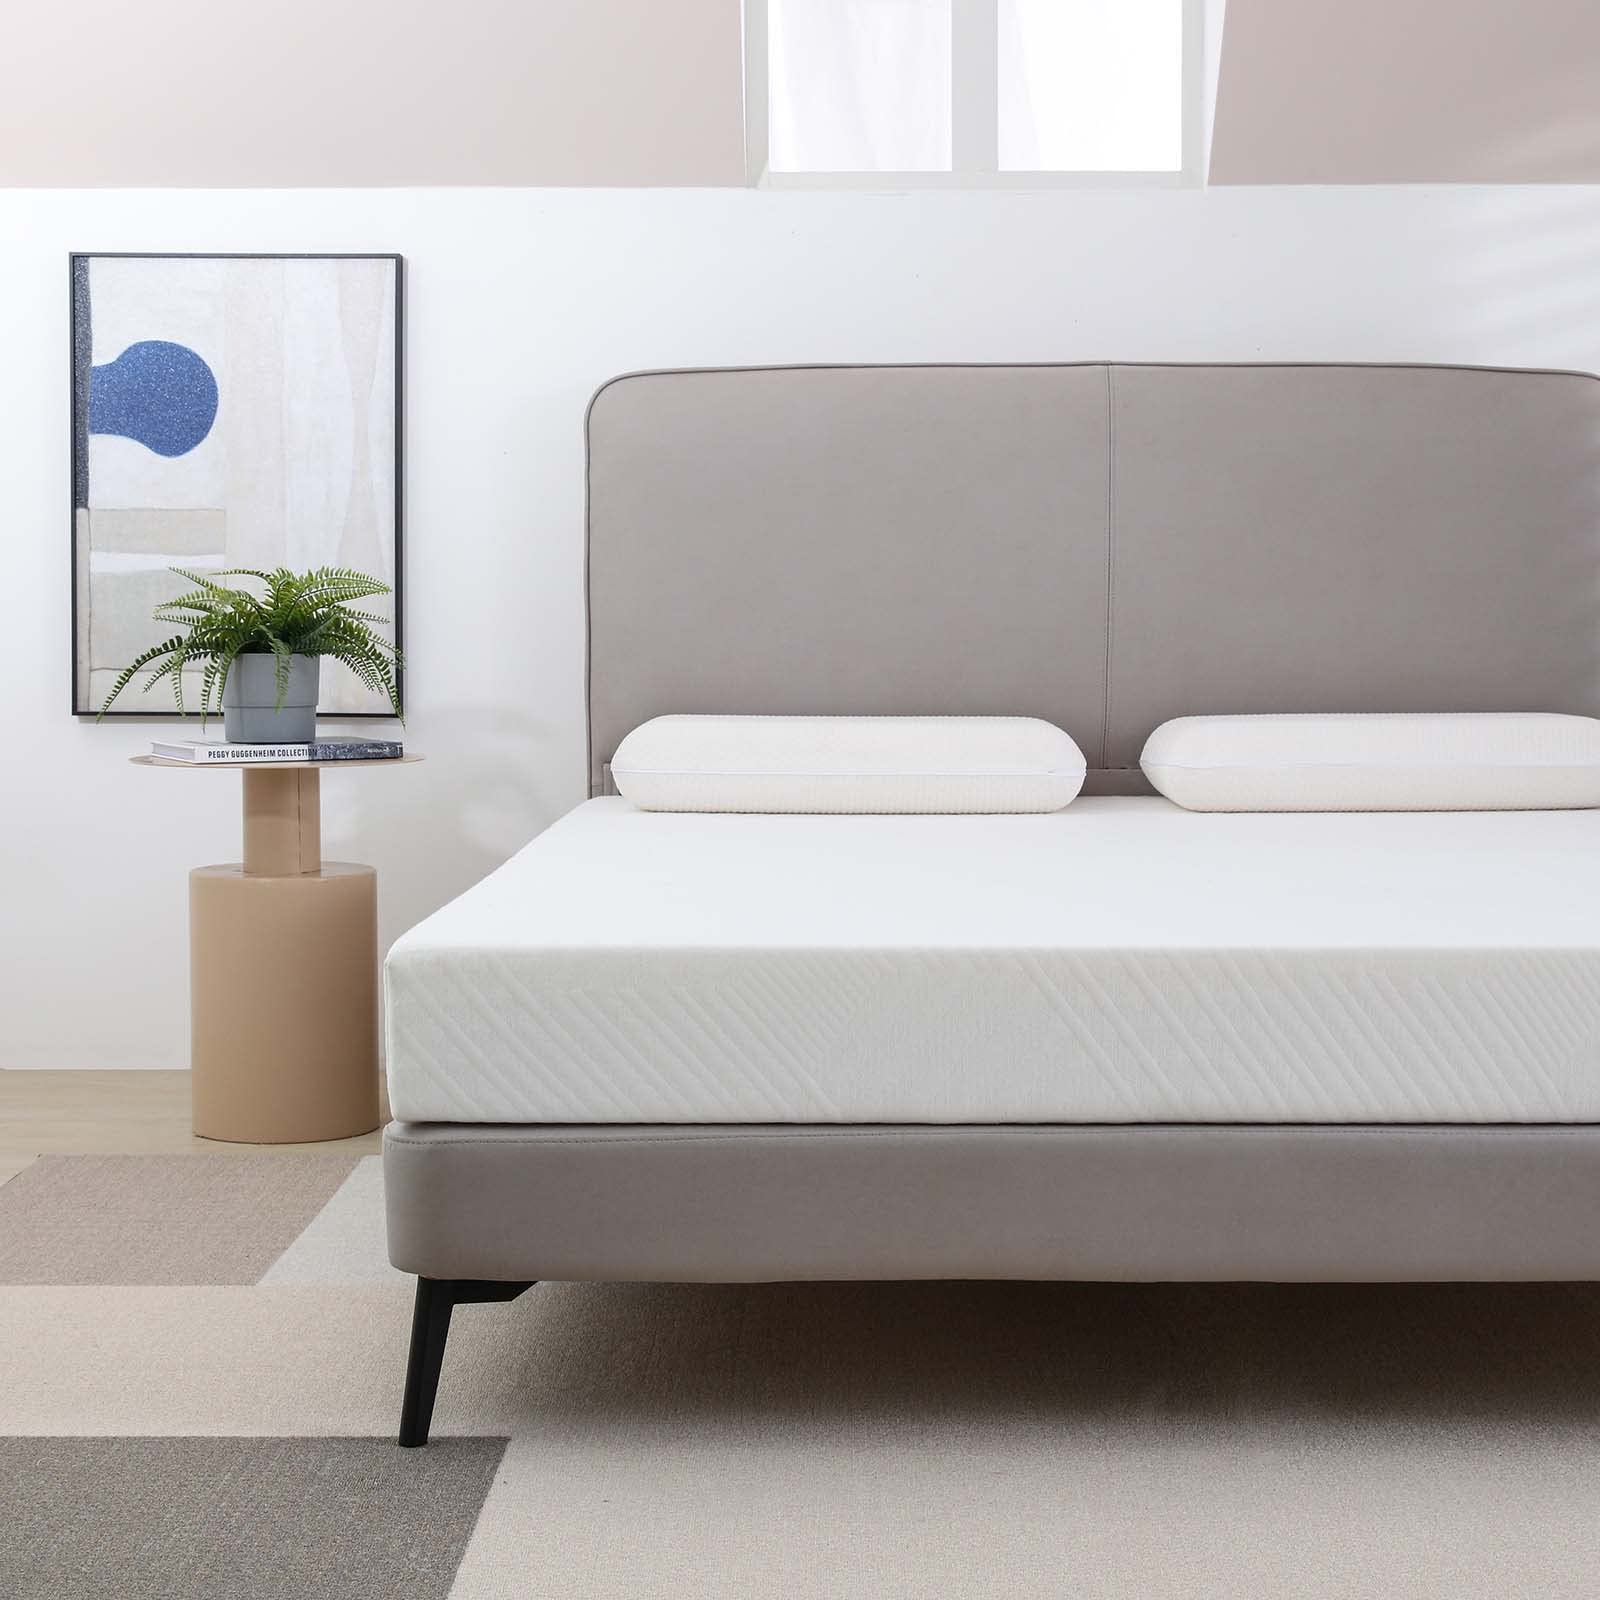 How Big Is A Daybed Mattress?